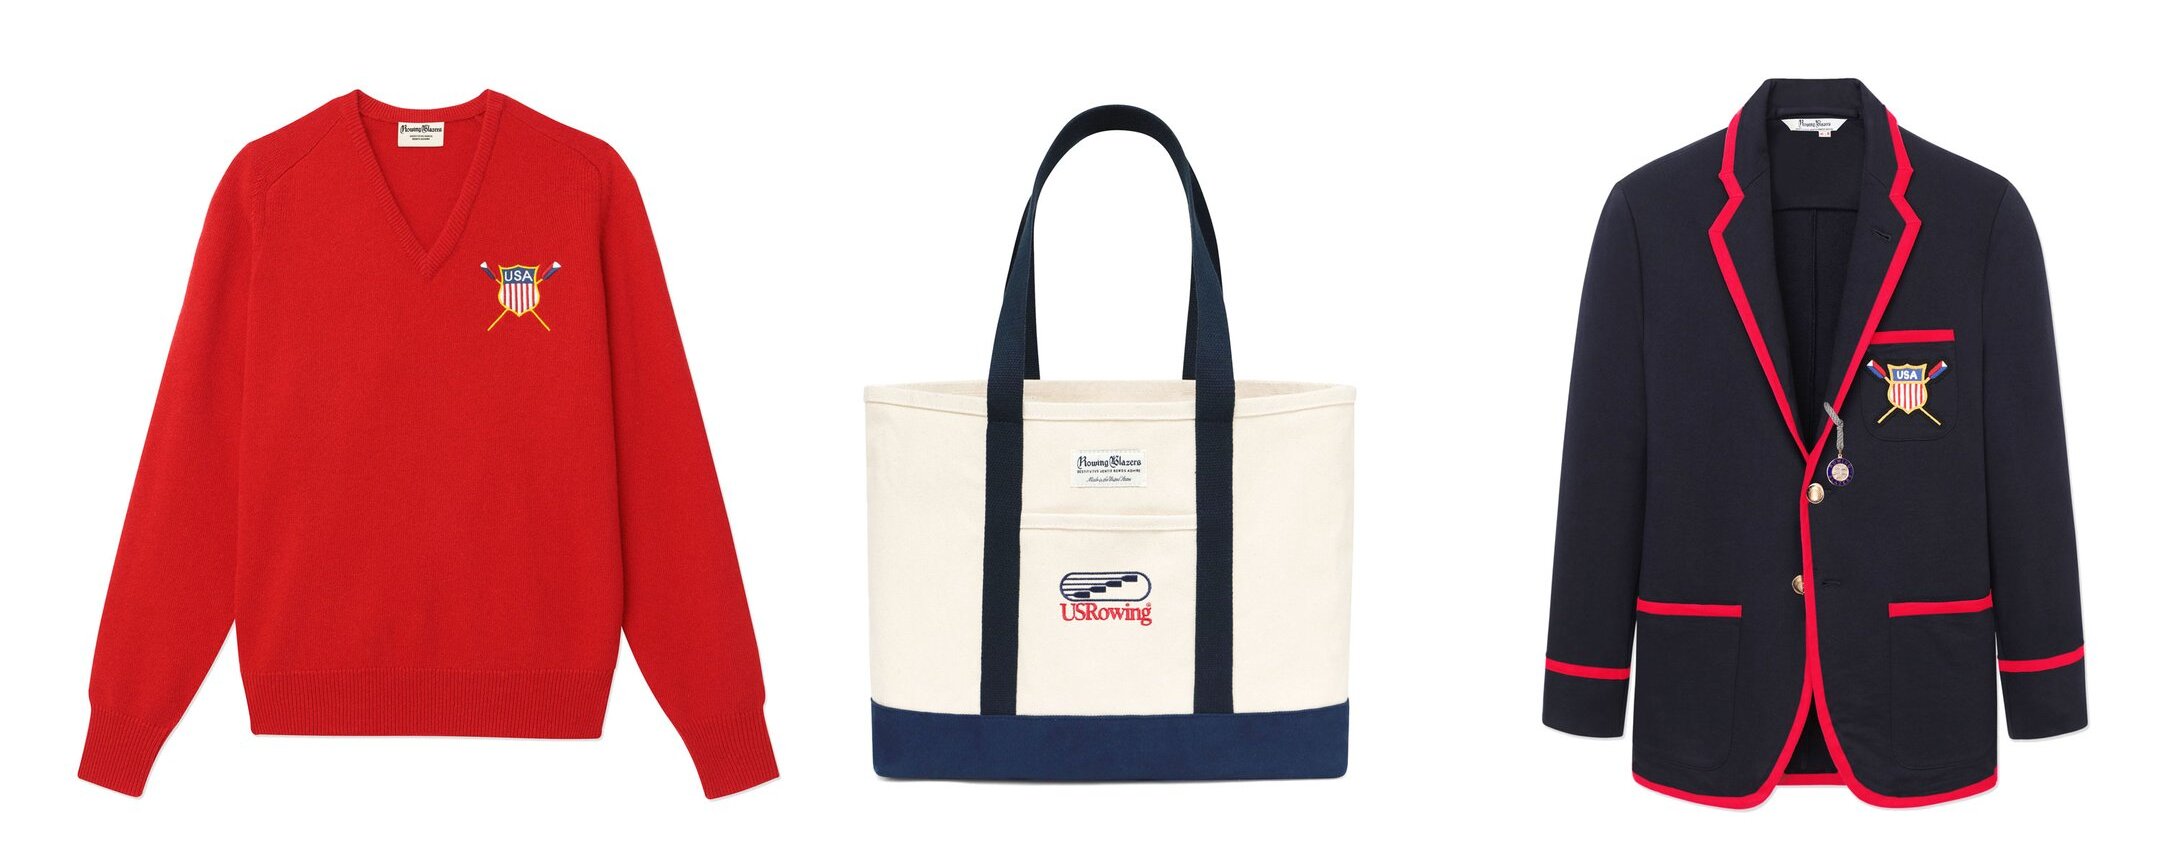 The USRowing Collection (Our partnership with USRowing is now available for preorder)